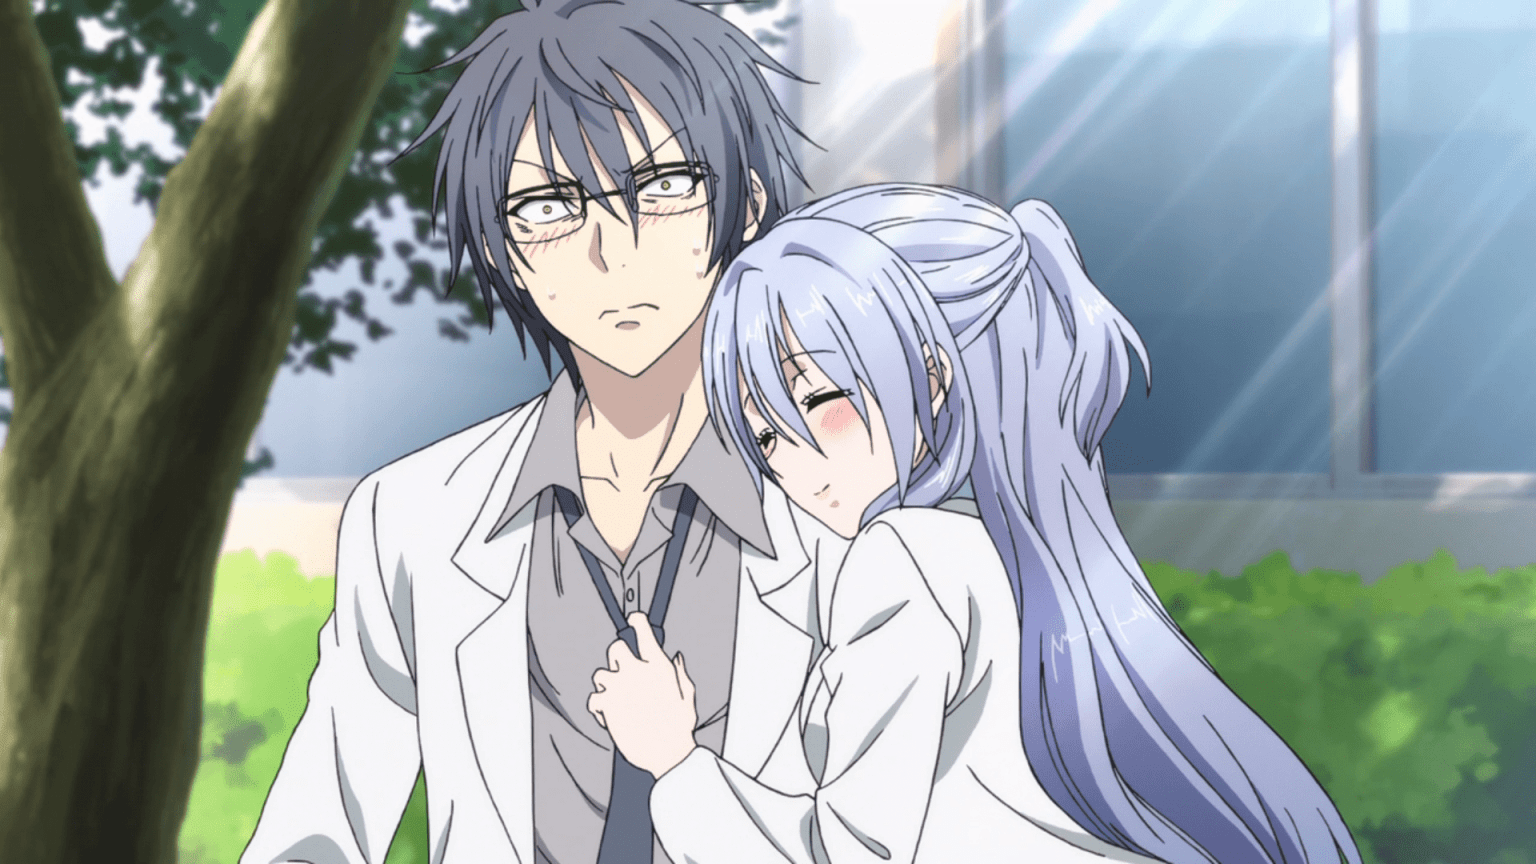 Top 20 Romance Anime Series of 2020 to Watch | Bakabuzz